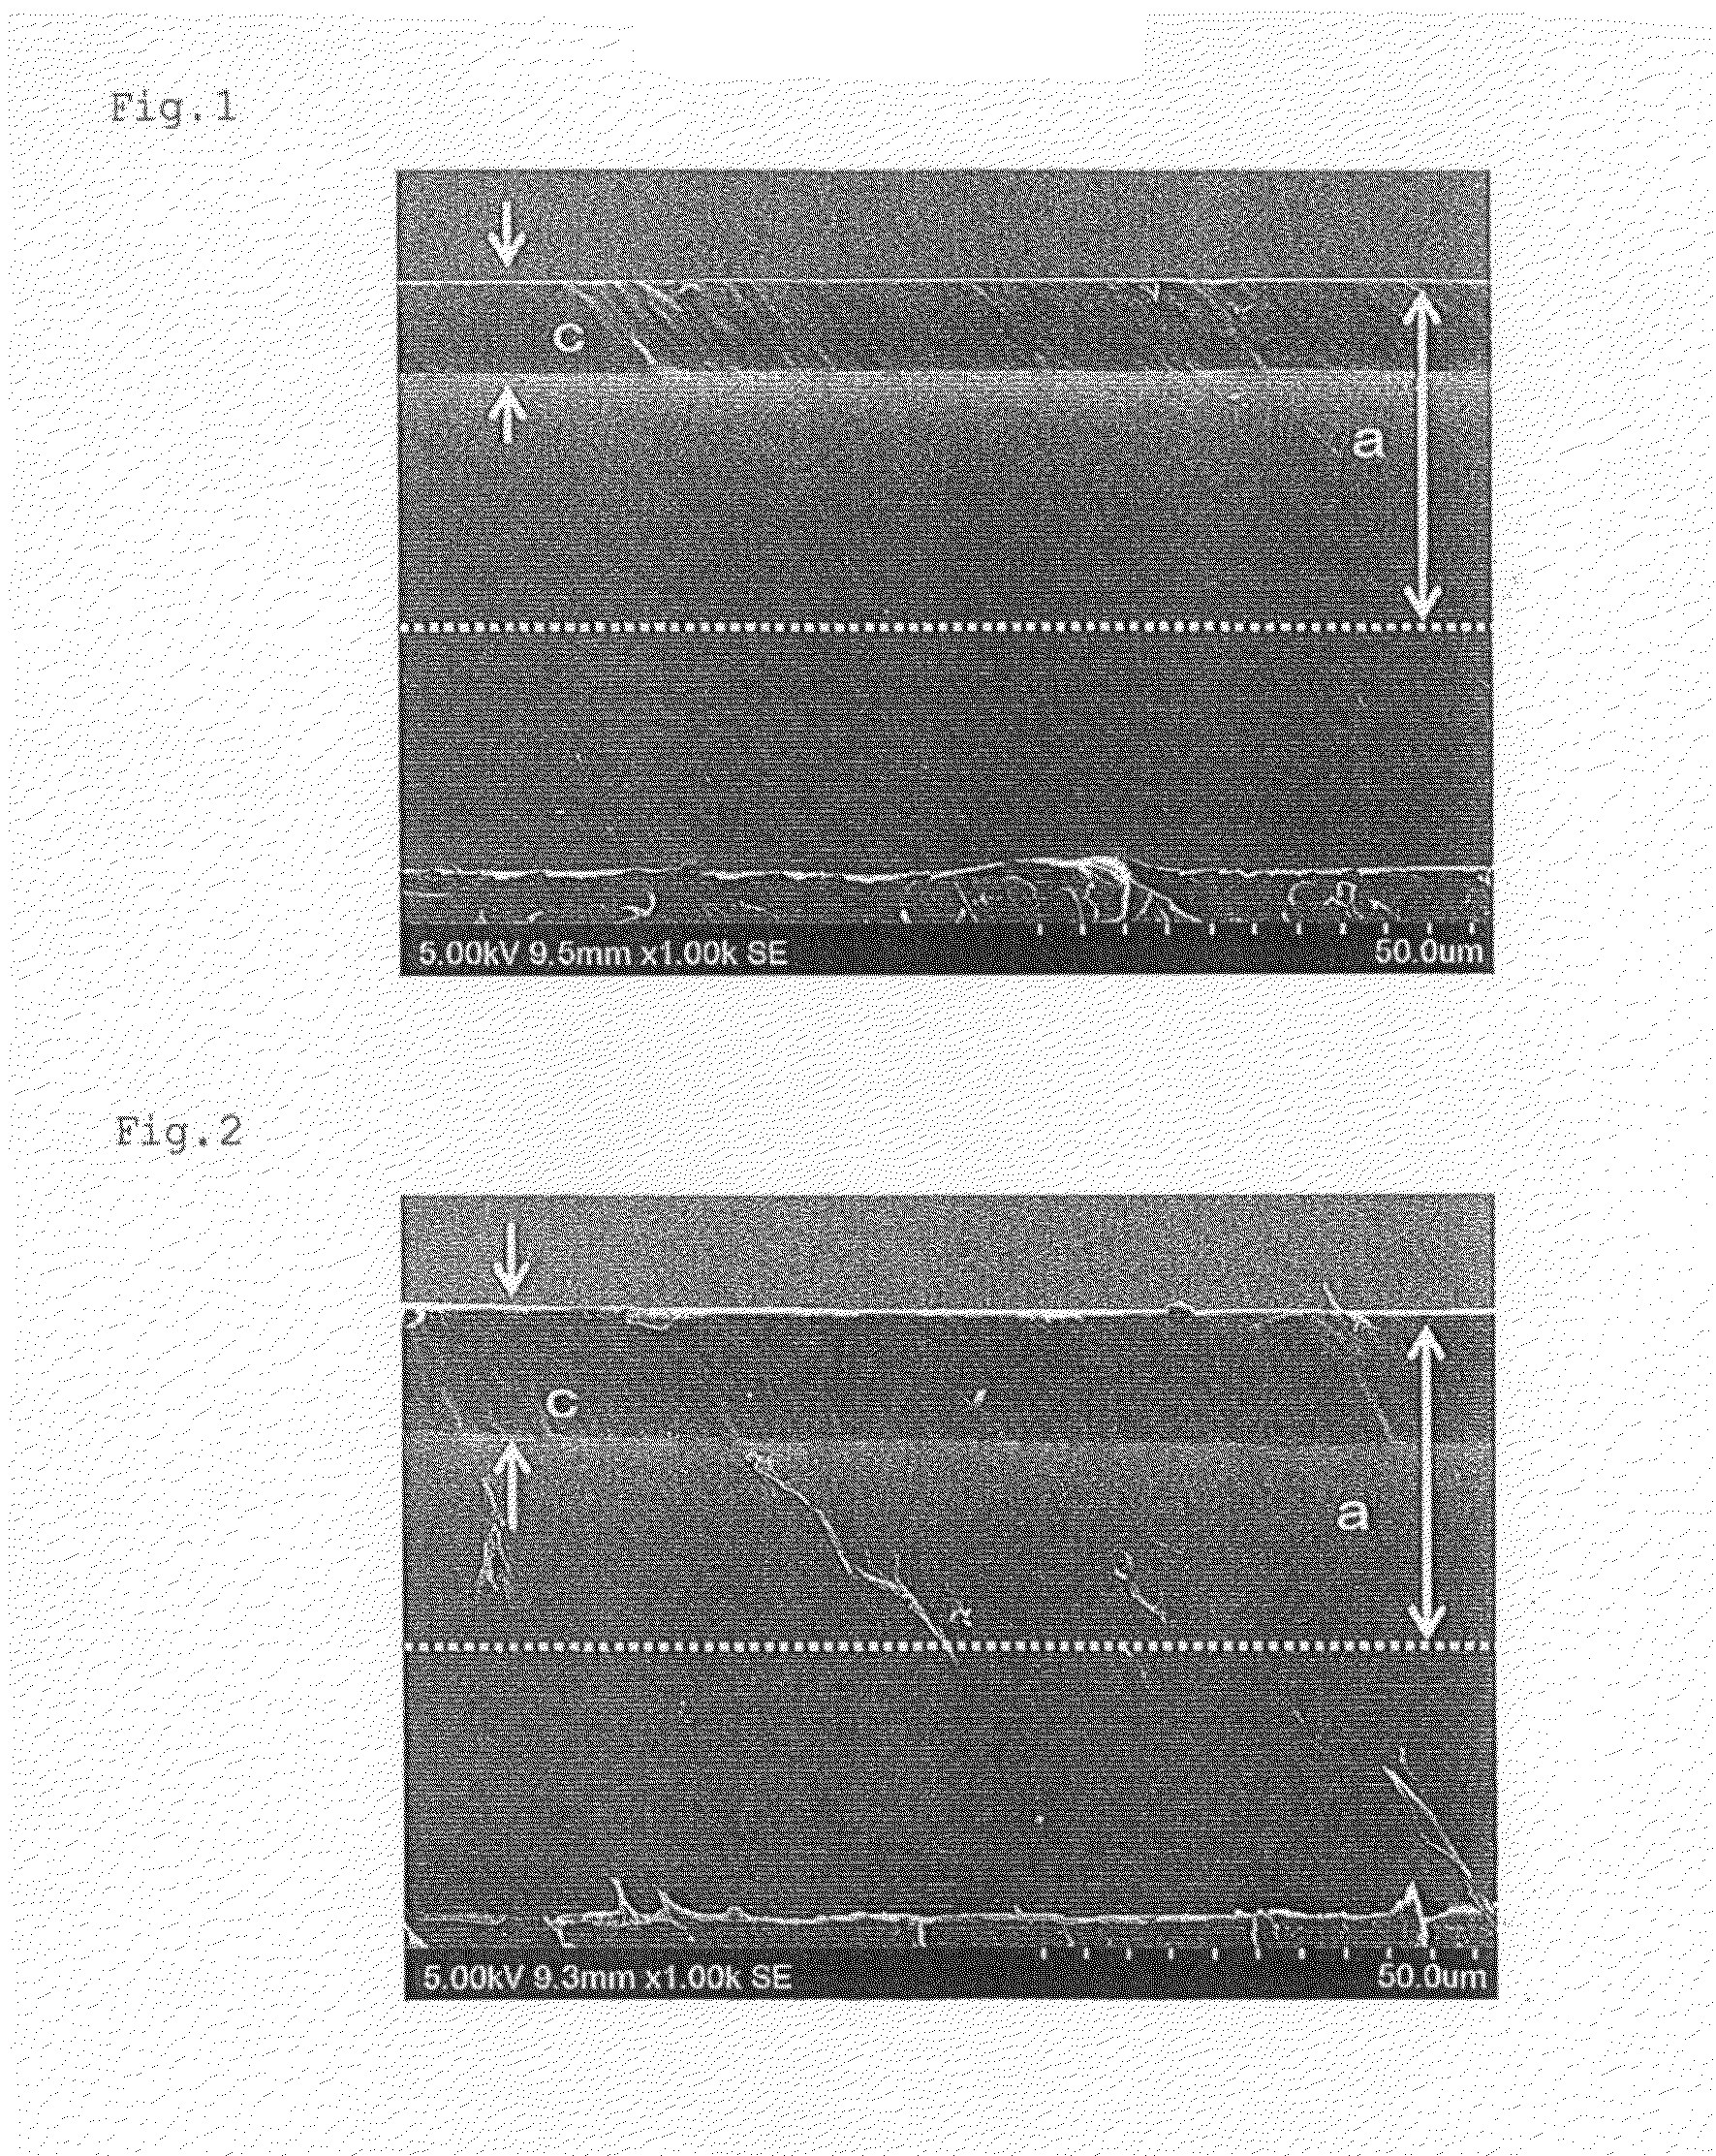 Viscoelastic articles with polymer layer containing elastomer unevenly distributed